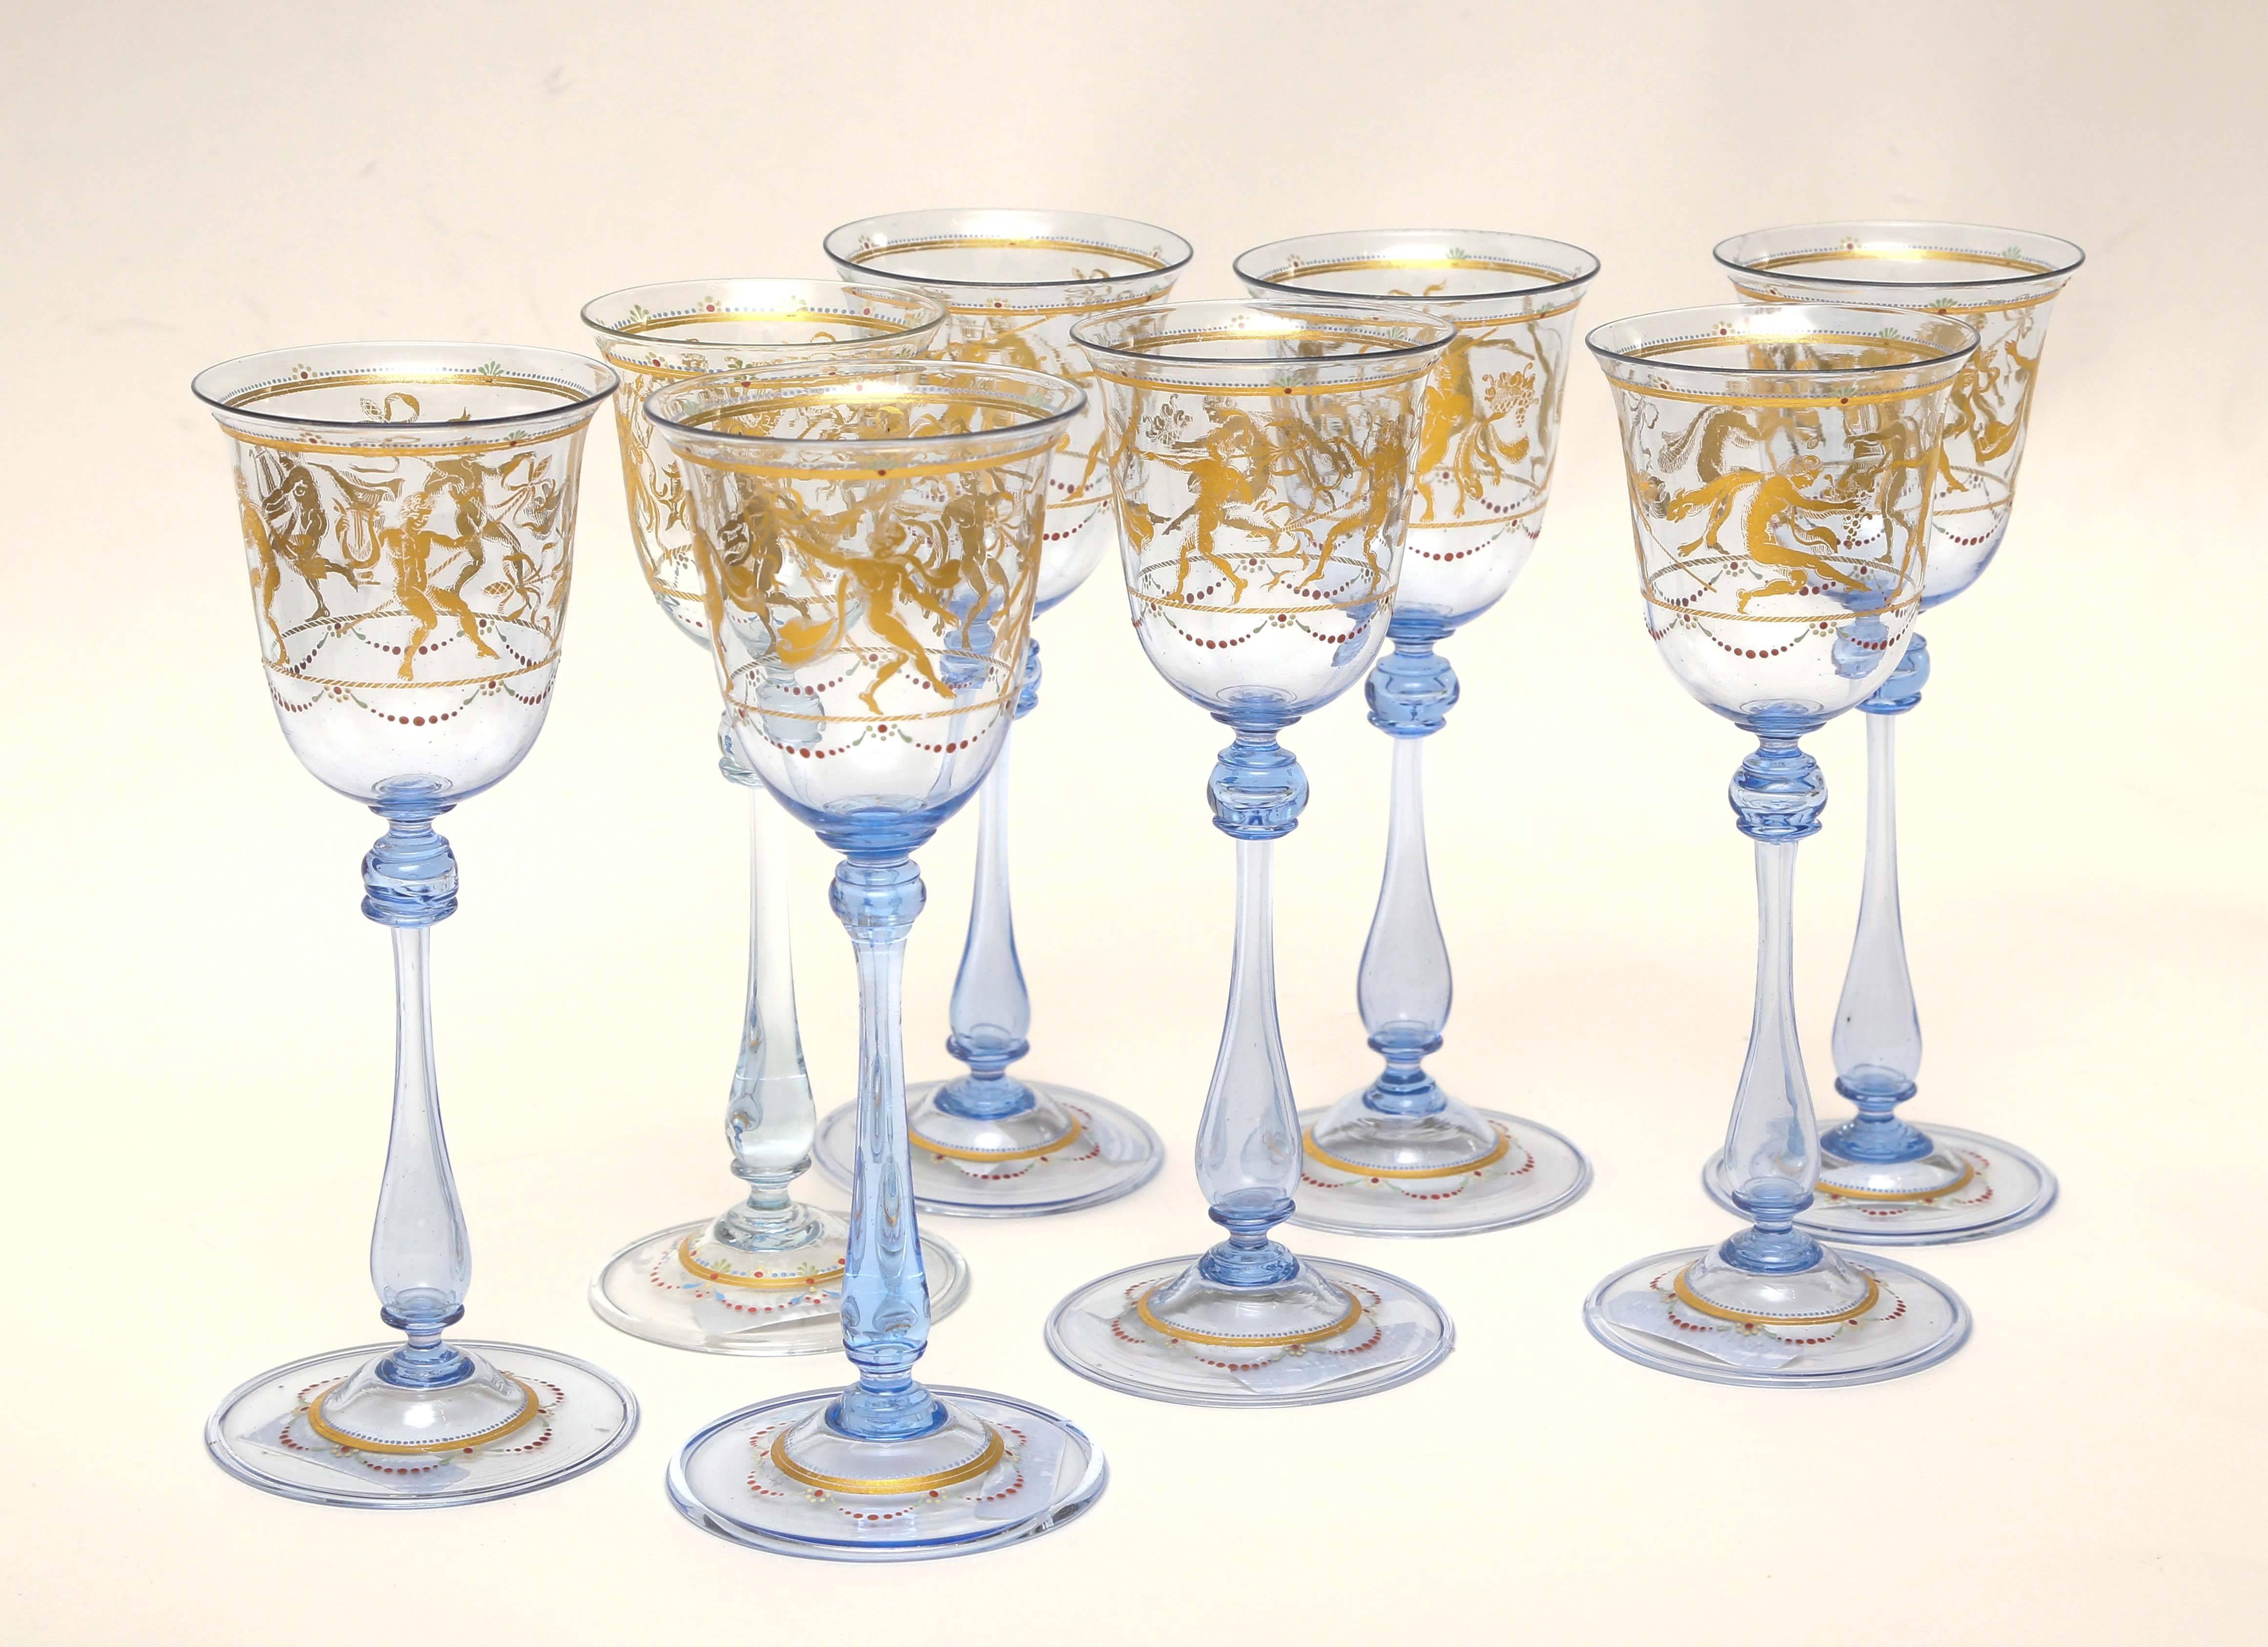 Gorgeous blue Venetian wine glasses featuring an all-over scenic surround with applied decoration, 24-karat gold decoration and blown inclusion. We love the swag beading and whimsical nature. These are nice and tall and well balanced. The extra